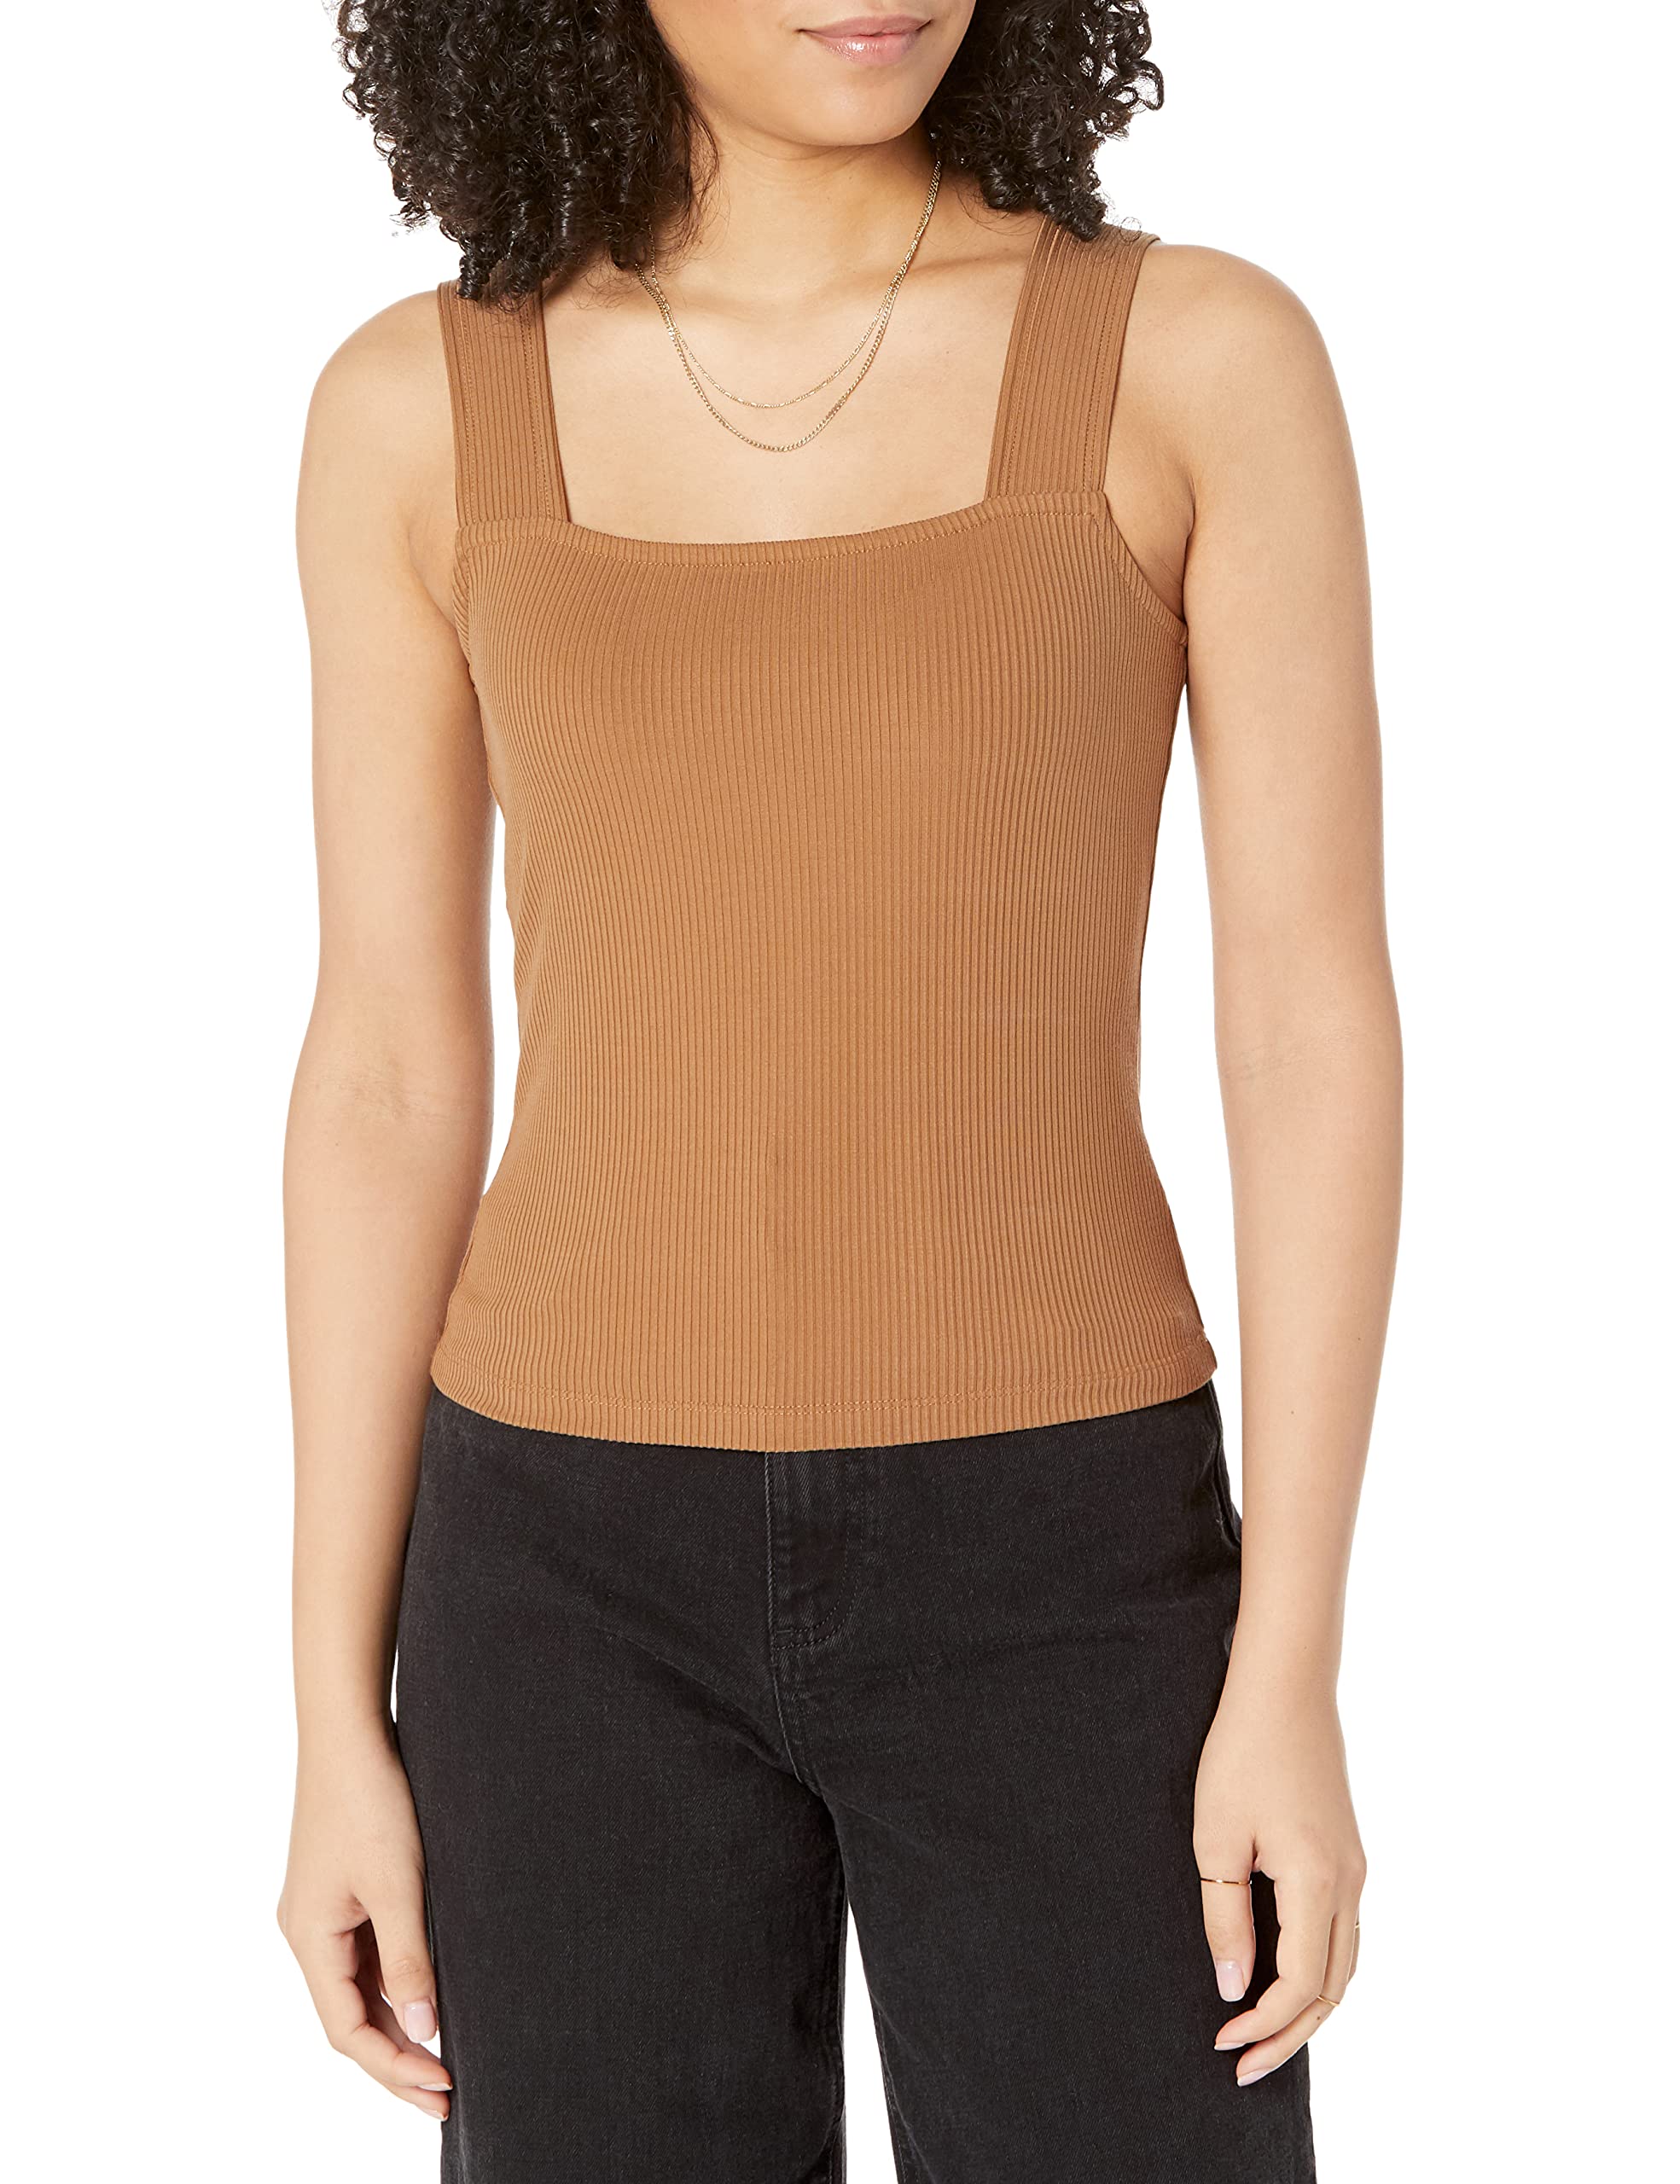 The Drop Women's Jody Square-Neck Cropped Fitted Rib Knit Tank Top